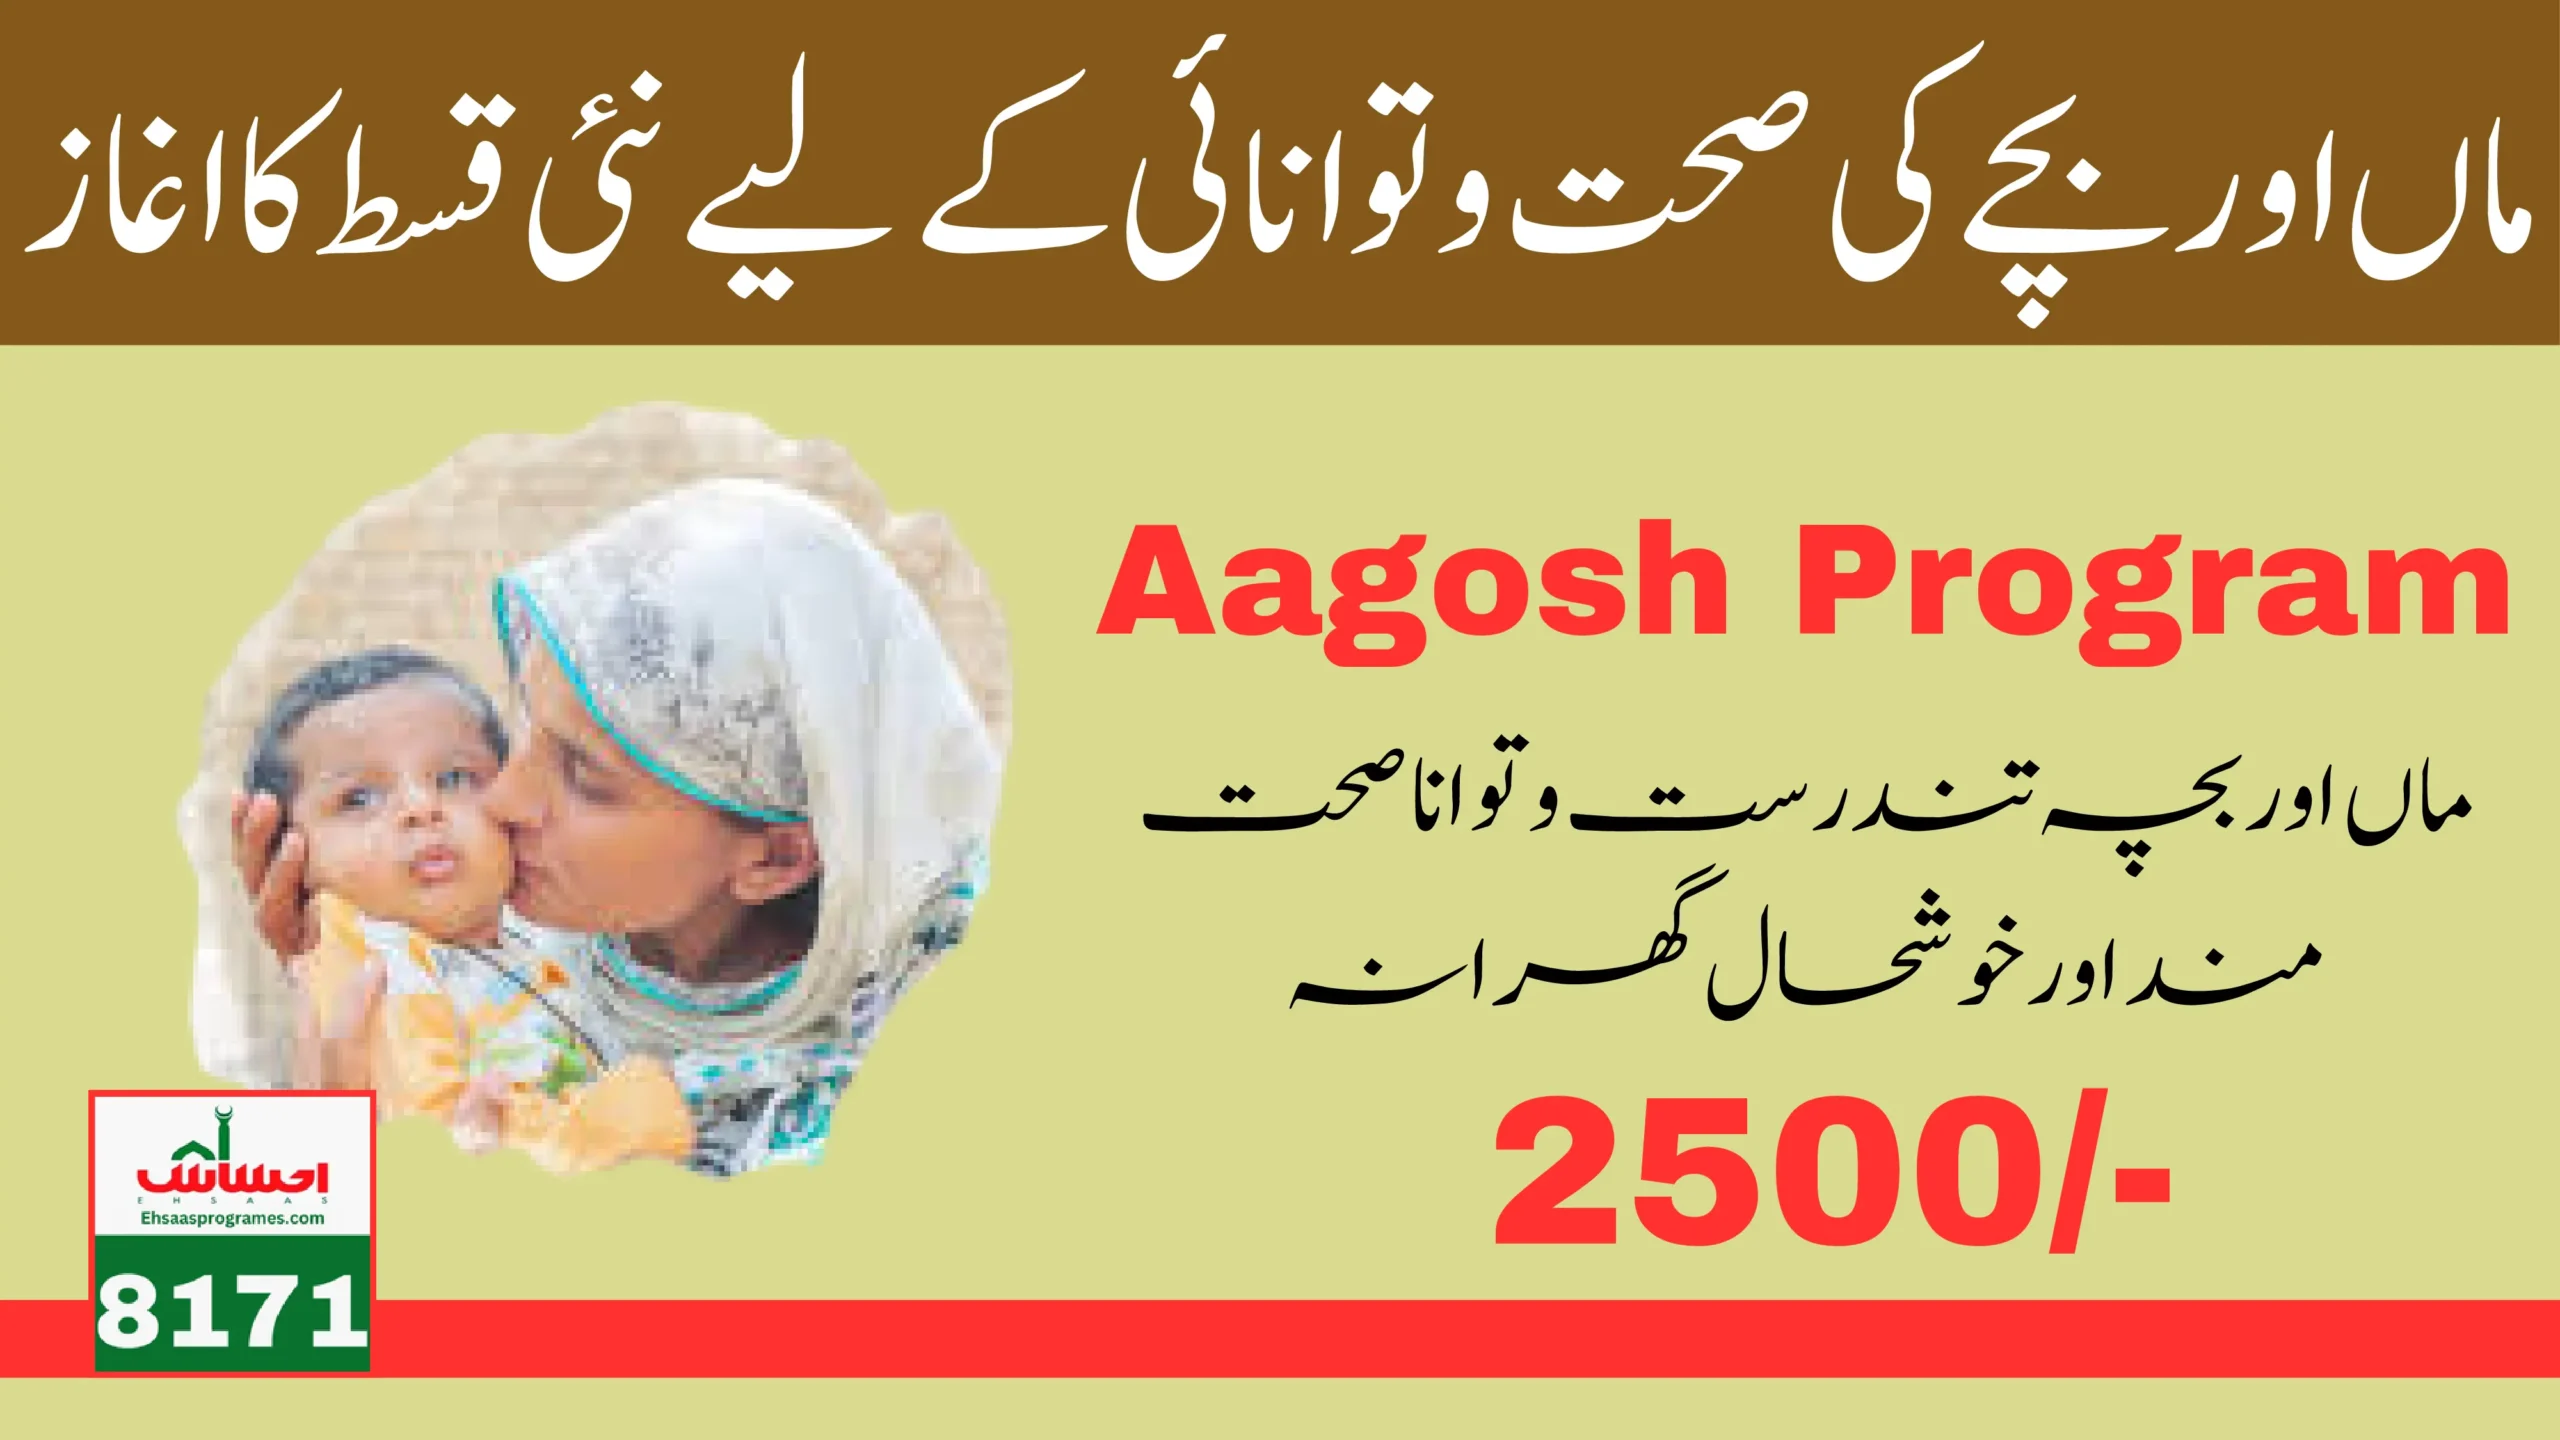 Aaghosh Program Qist Starts For Childs & Pregnant Women Through Cash Centers Agents In Hospitals